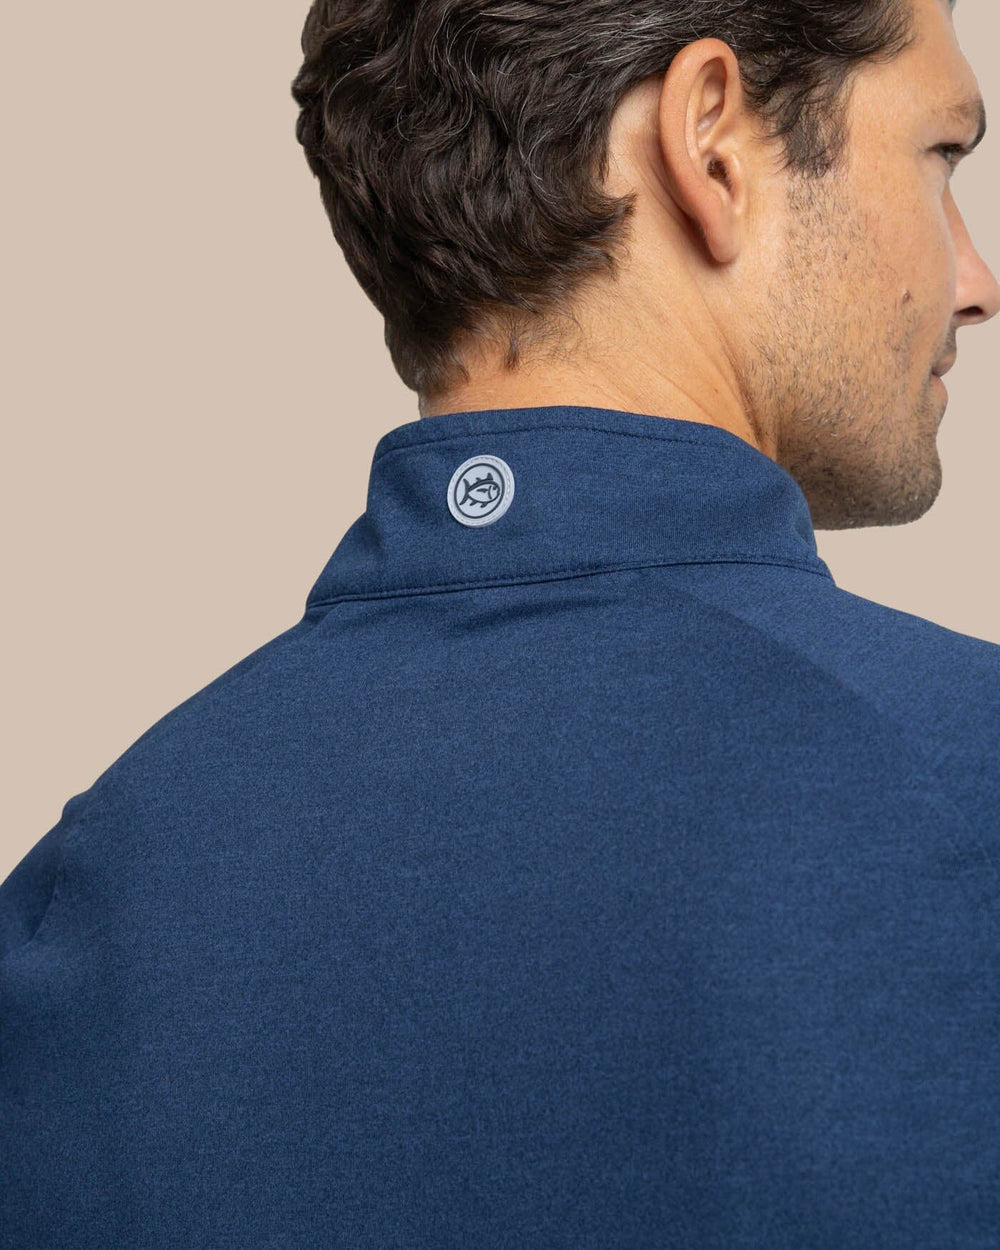 The yoke view of the Southern Tide Cruiser Heather Quarter Zip Pullover by Southern Tide - Heather Dress Blue